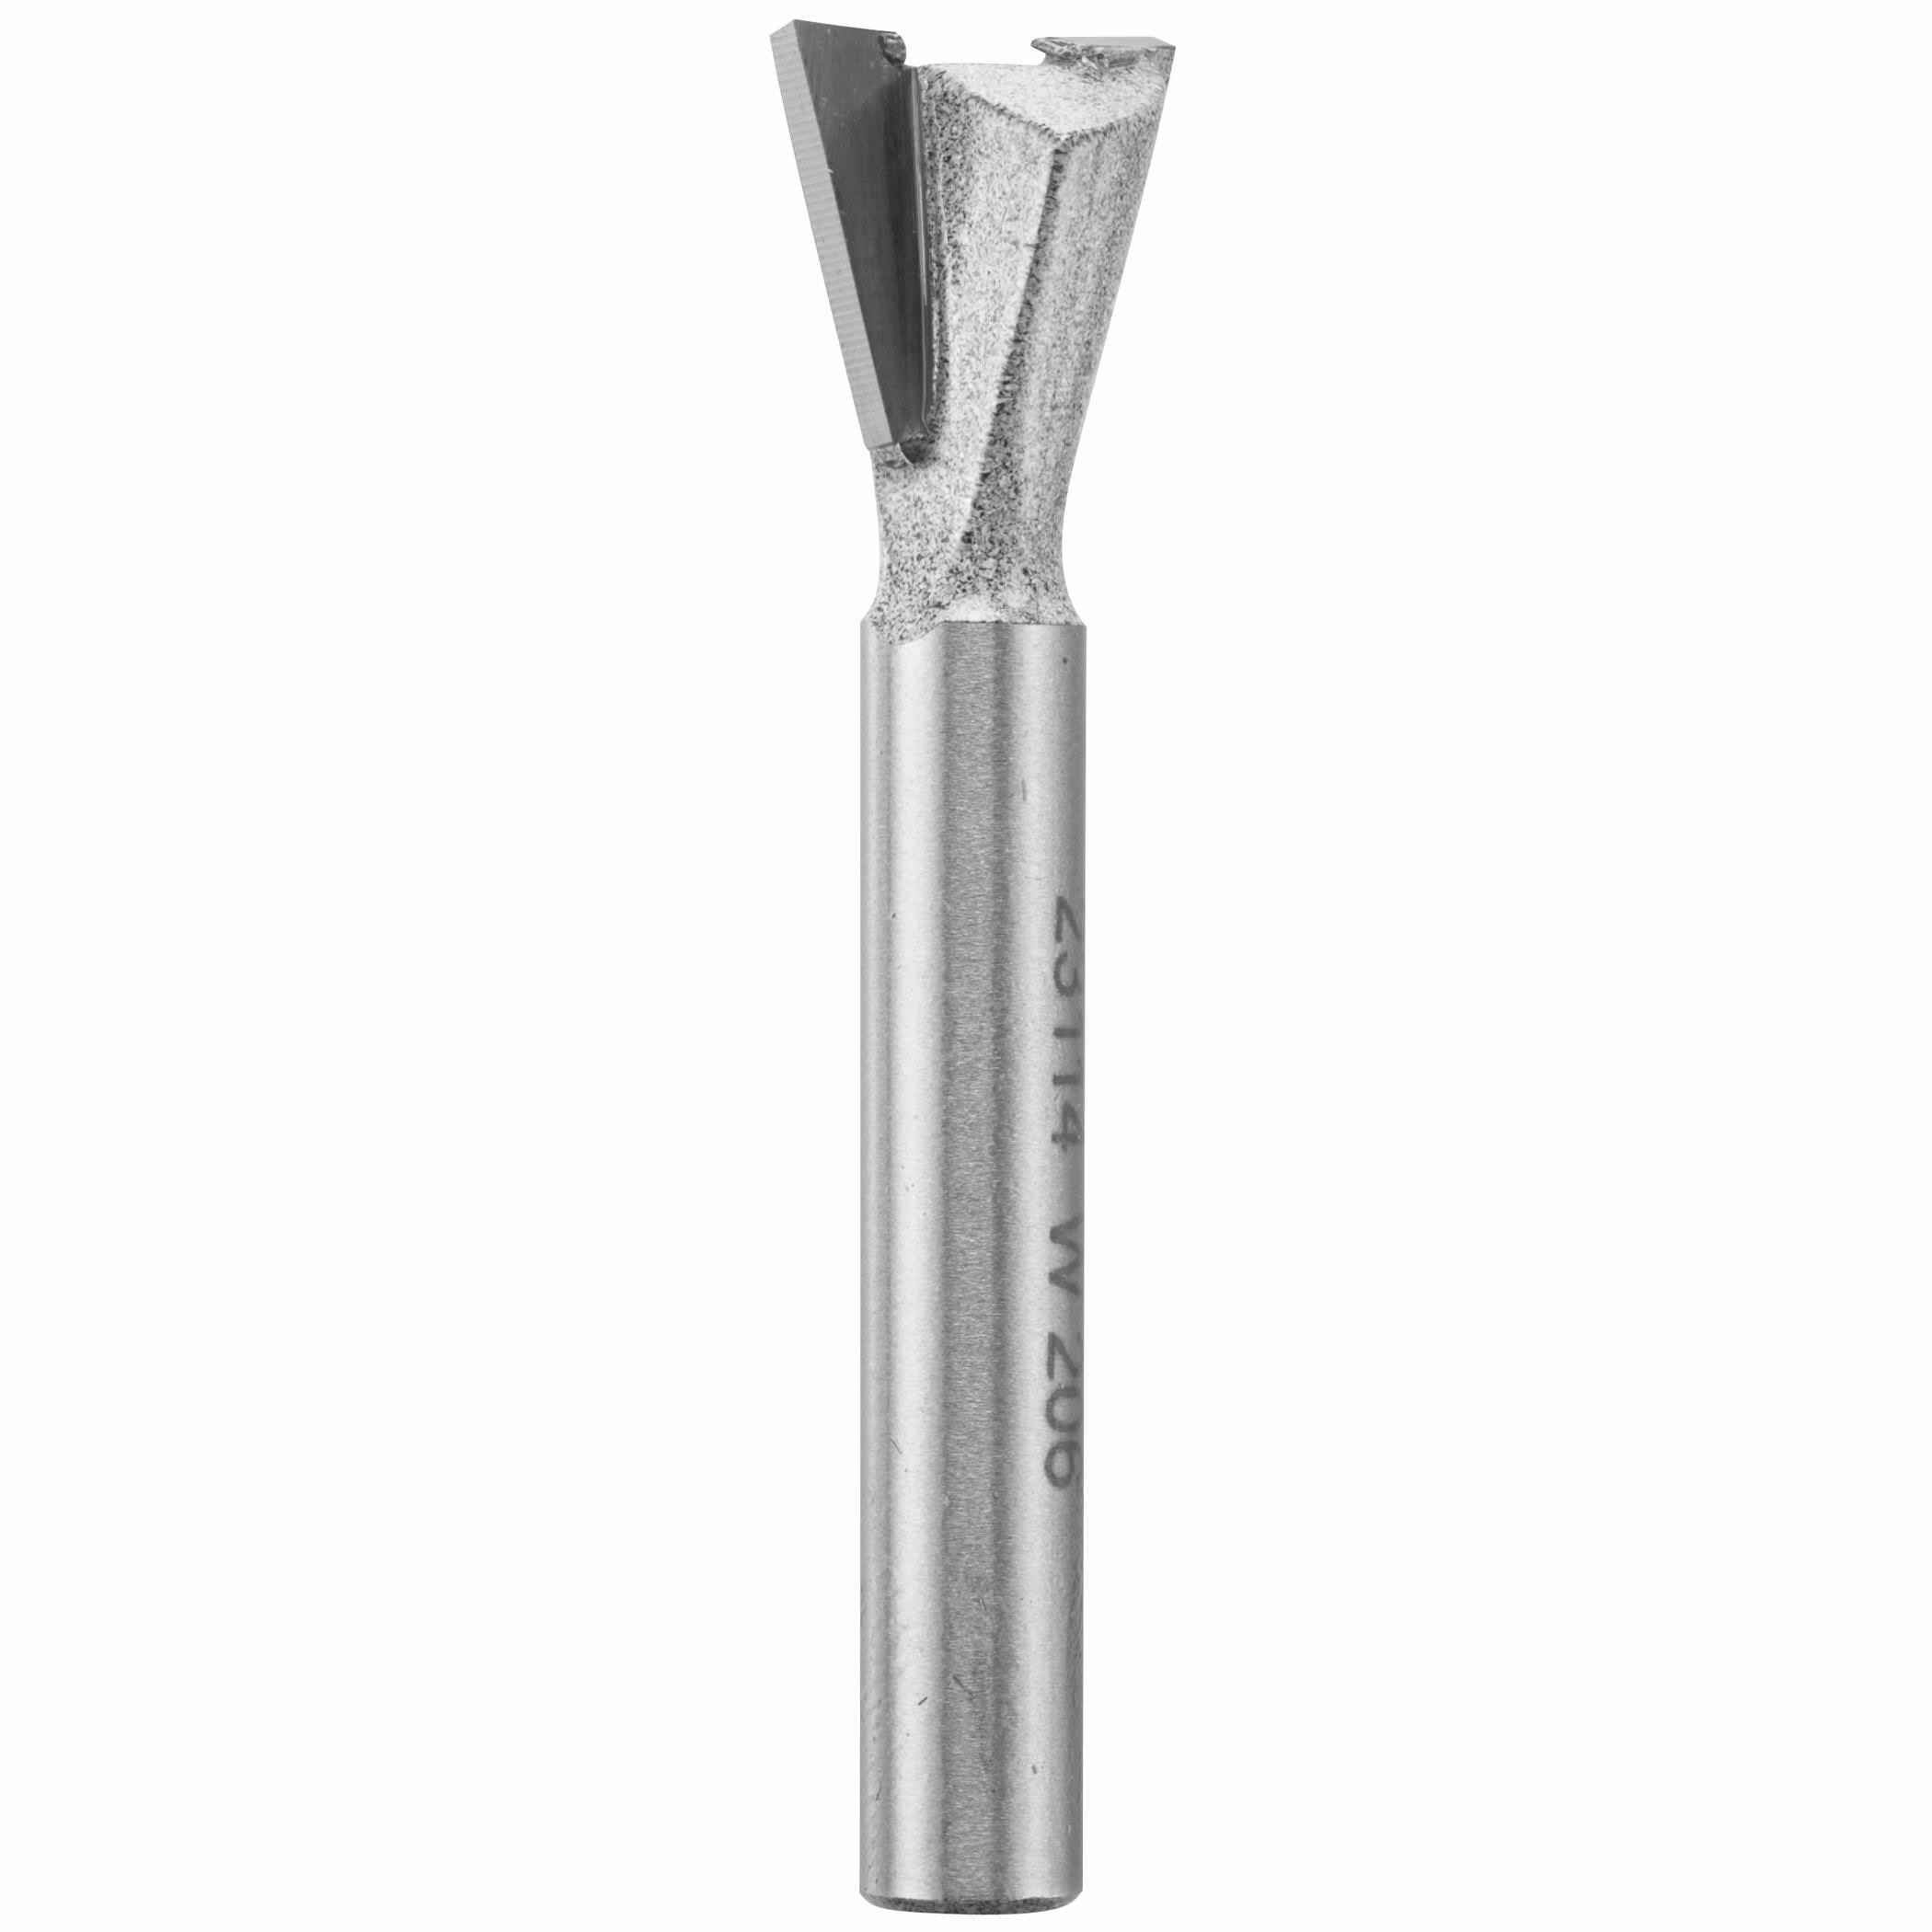 Vermont American Carbide Tipped Dovetail Router Bit - 2 Flute, 1/4" Shank, 1/2" X 15 Degree